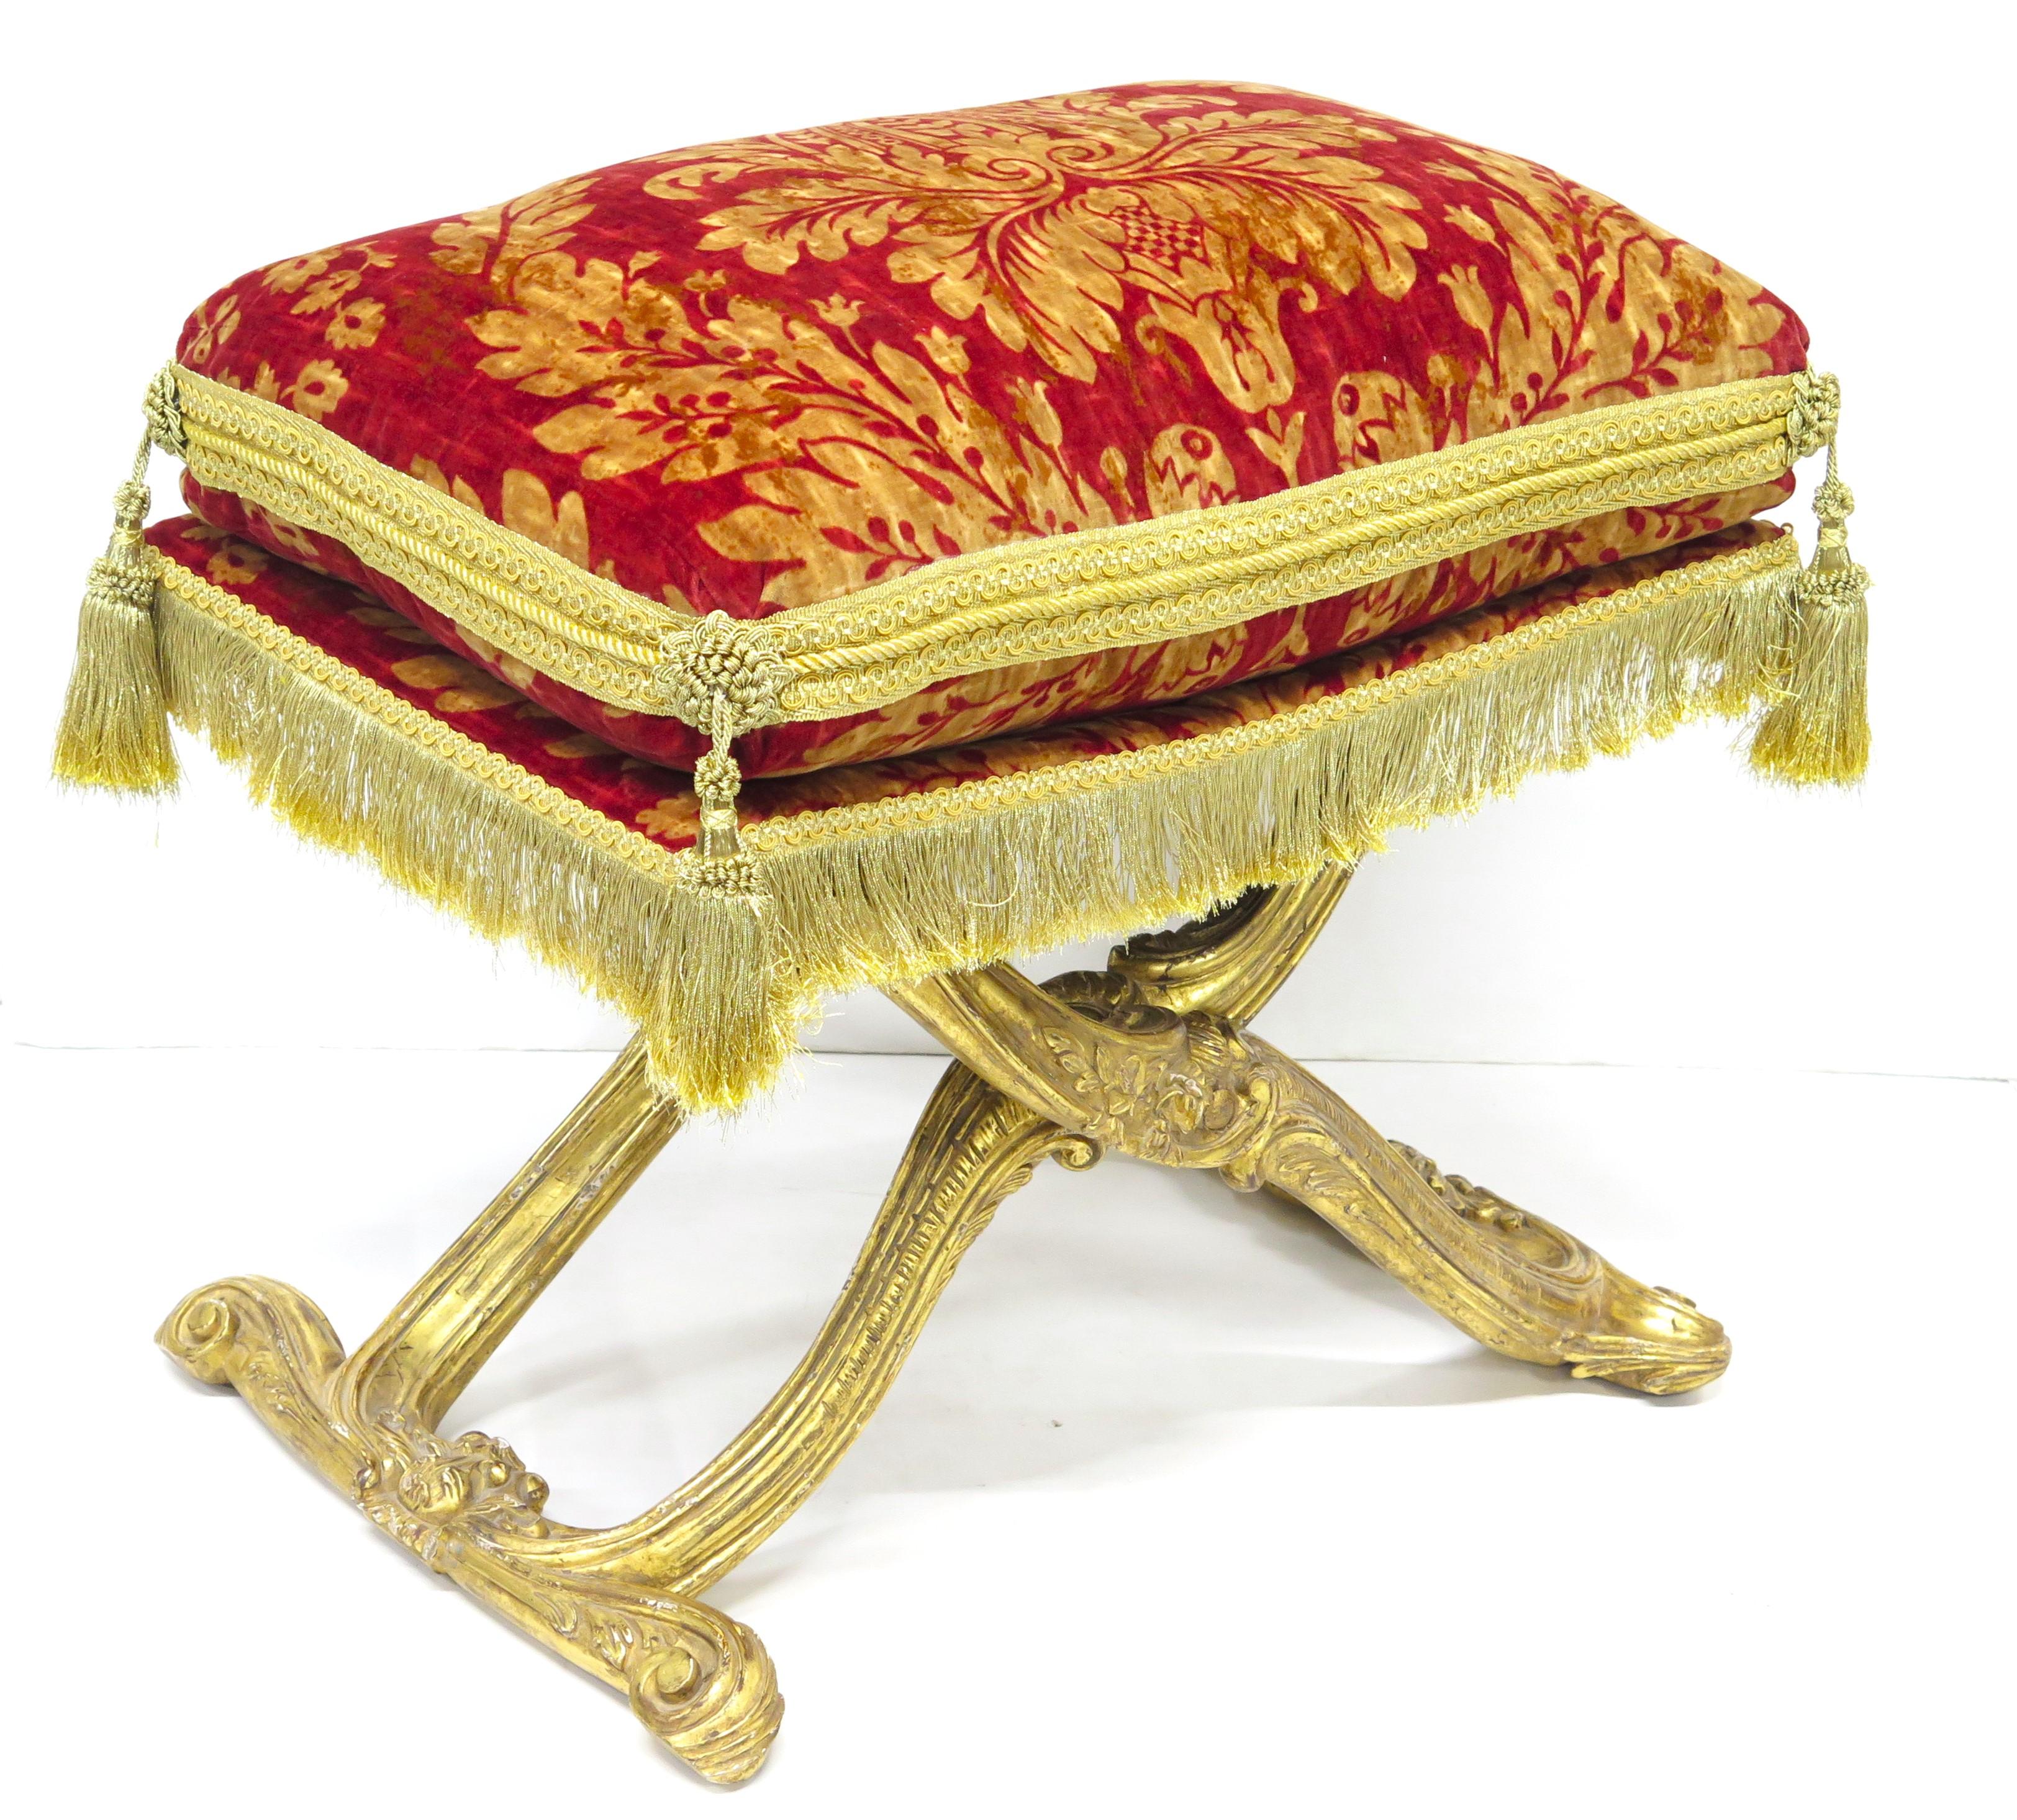 a Louis XV-style carved and gilded X-shaped folding stool / curule seat with a plump red and gold Damask printed velvet cushion / pillow with elaborate passementarie embellishments including gold braid, cord, trimmings, bullion fringe, and tassels,